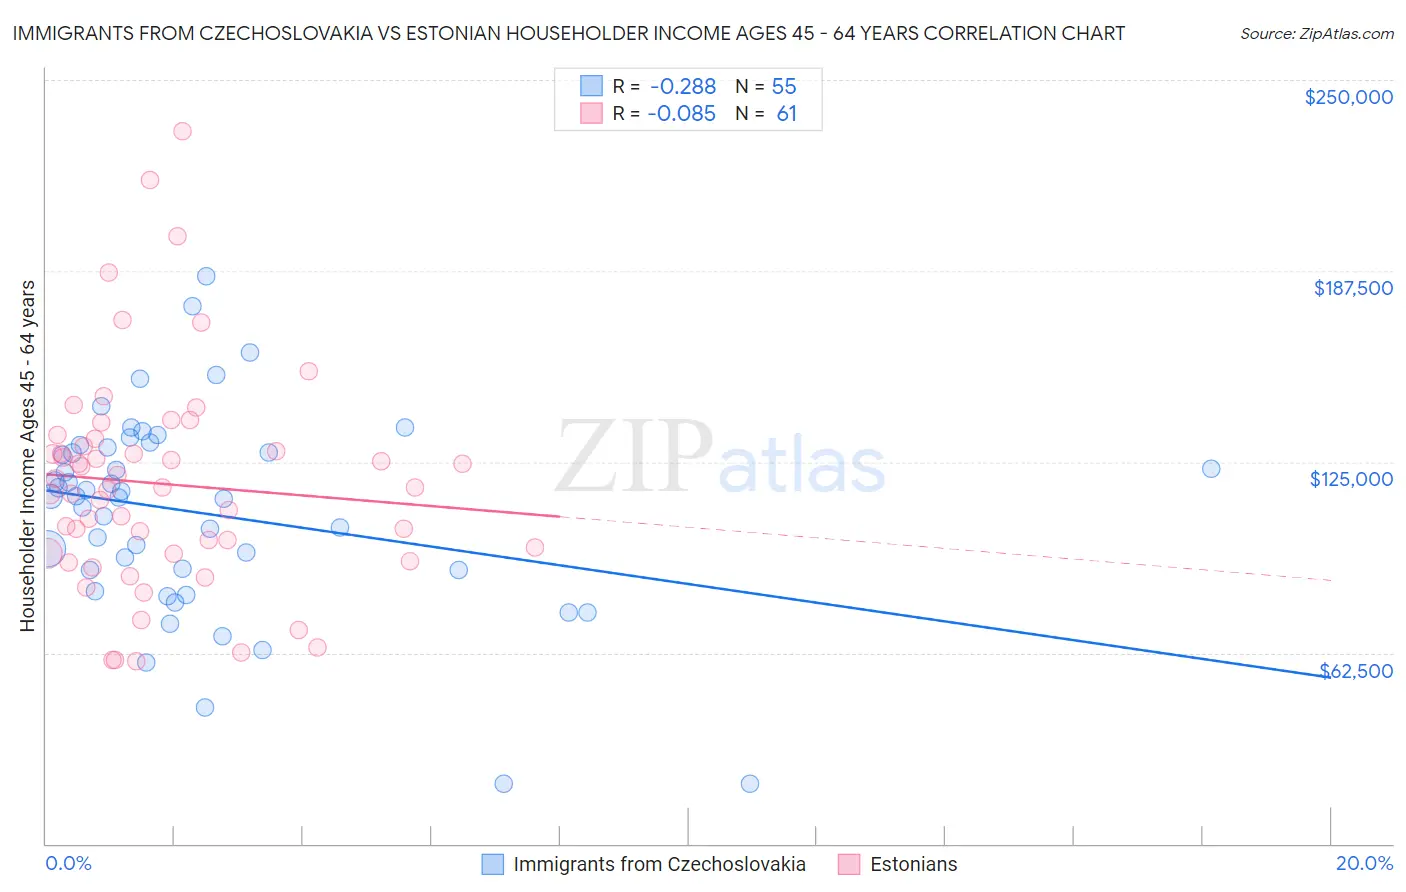 Immigrants from Czechoslovakia vs Estonian Householder Income Ages 45 - 64 years